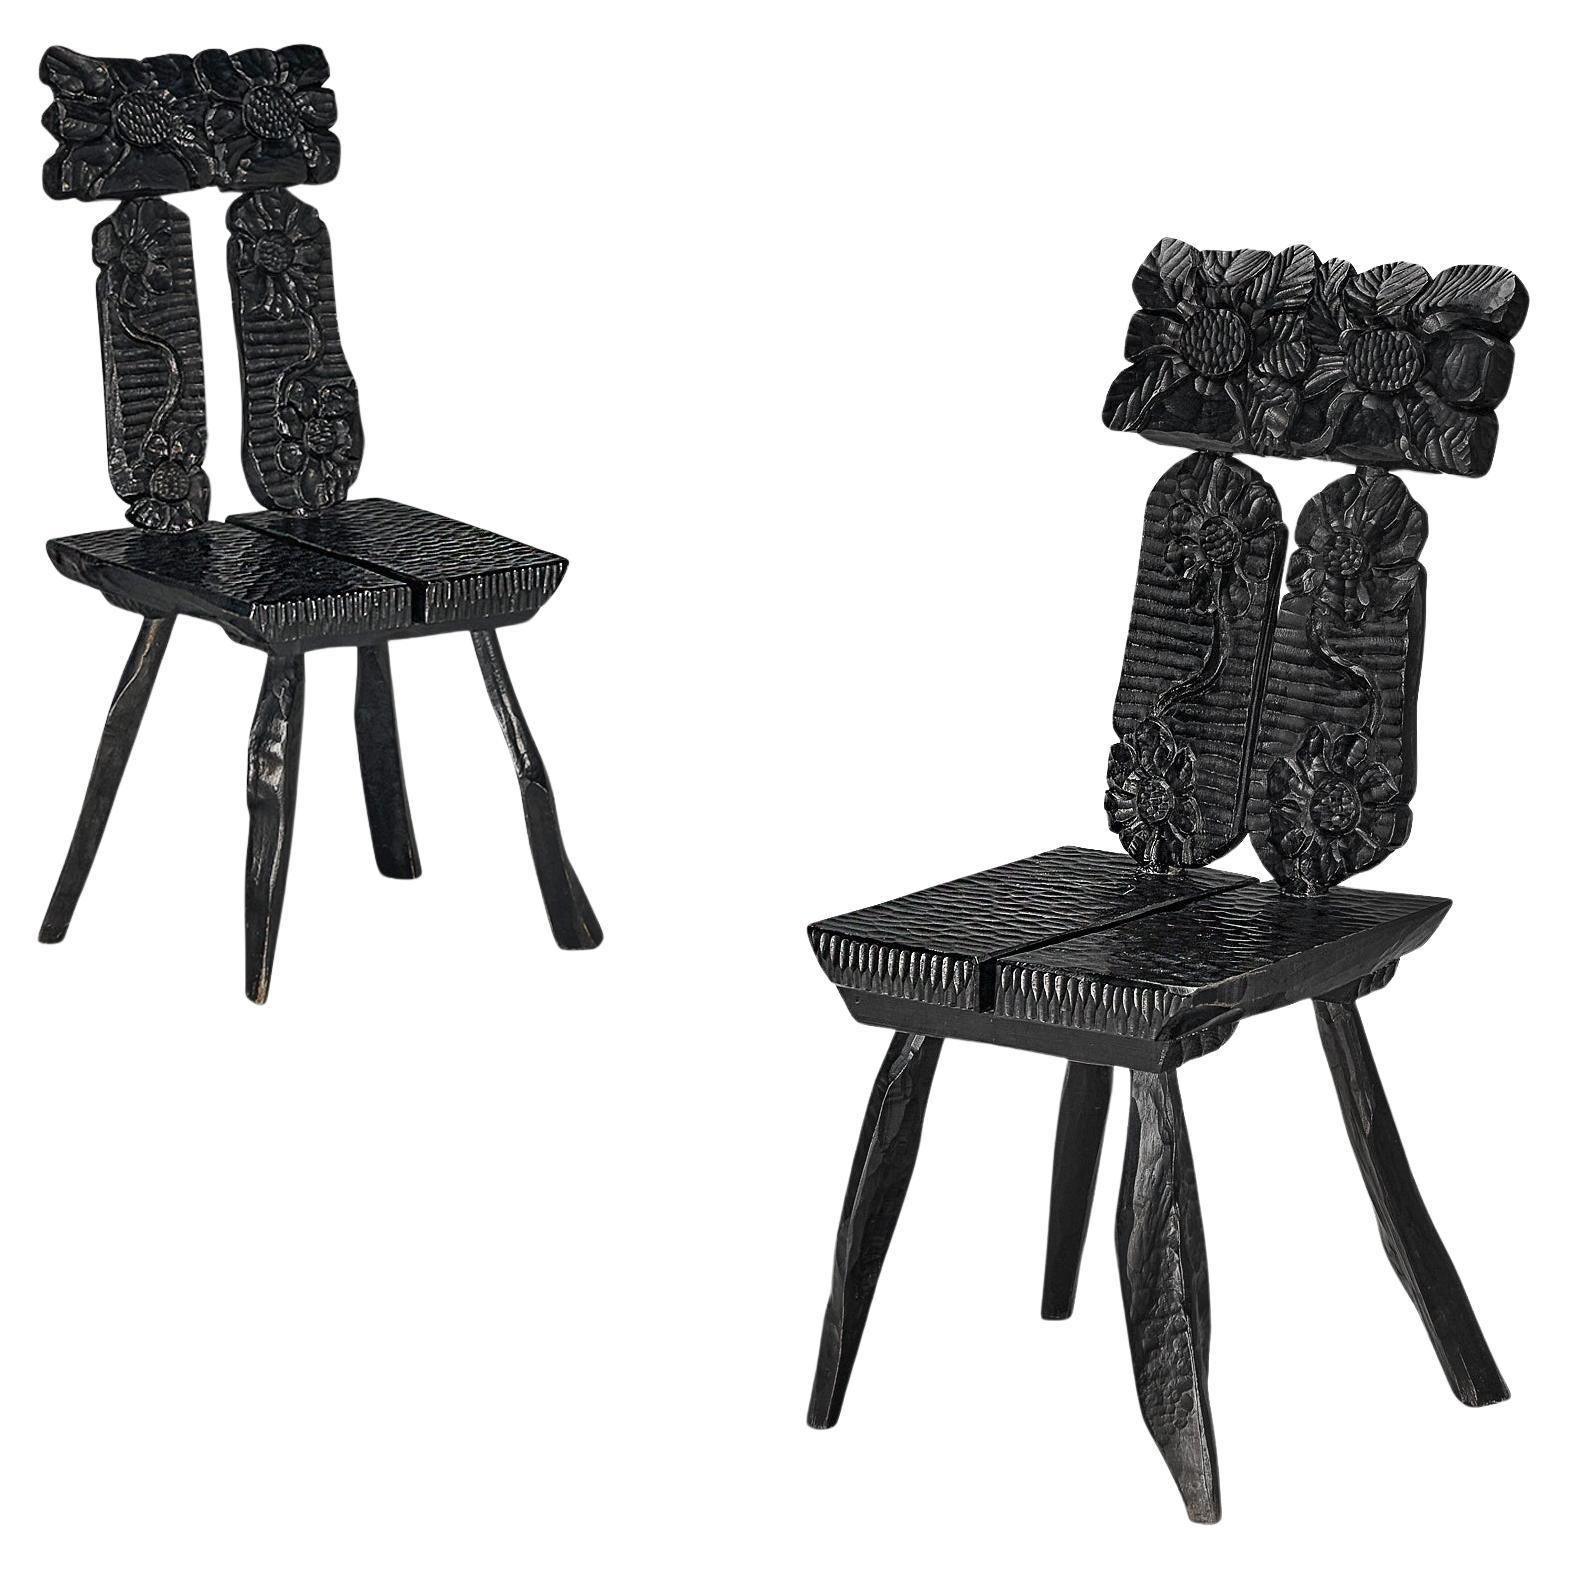 Sculptural Dining Chairs in Black Lacquered Wood with Decorative Carvings  For Sale